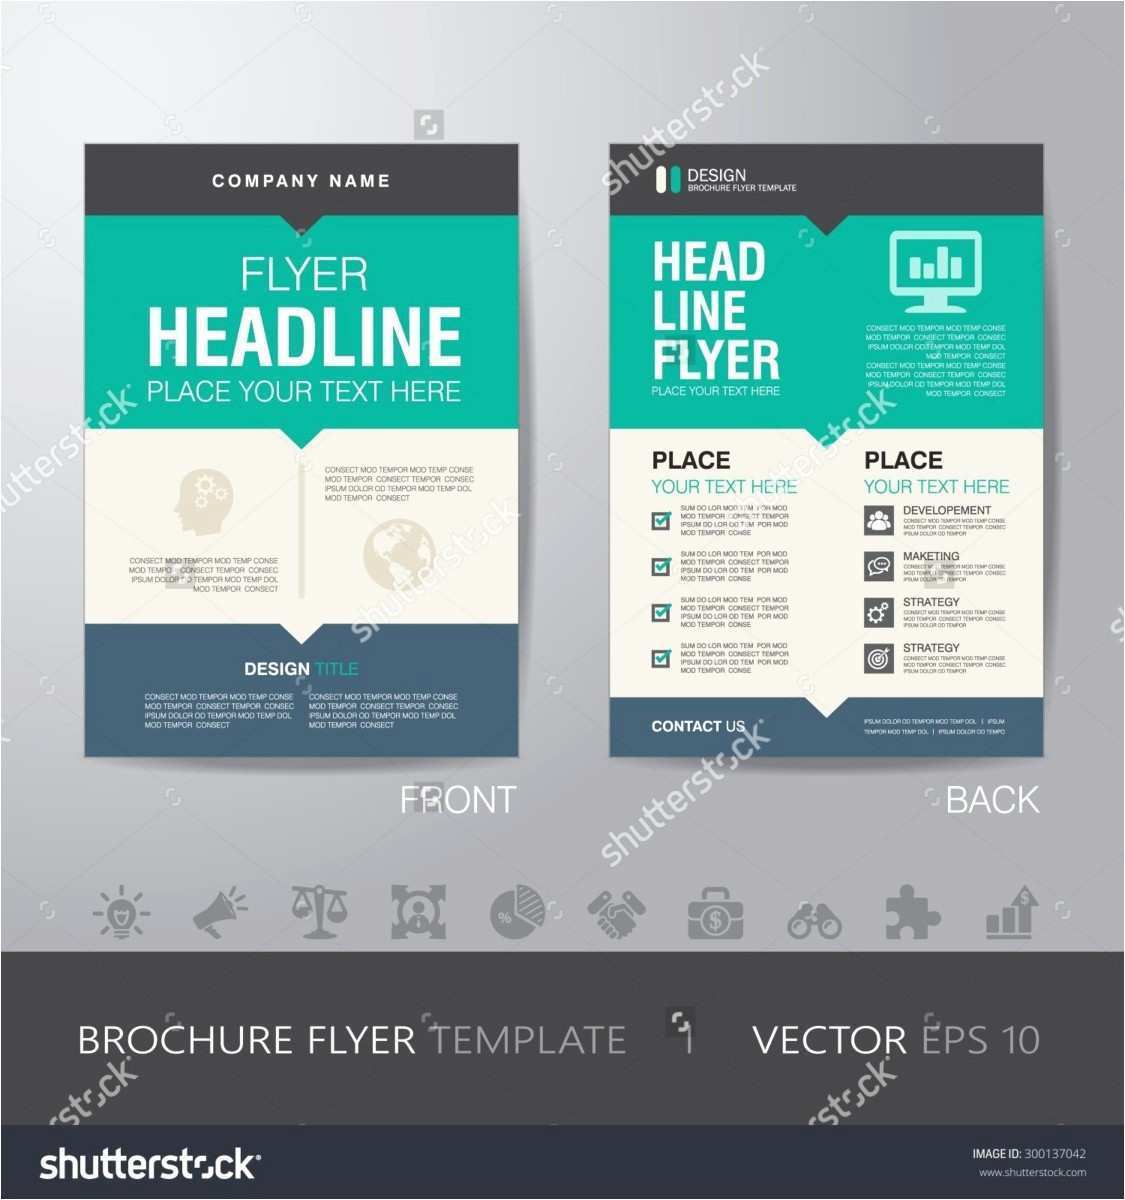 84 Creating Flyer Templates Google Docs With Flyer Templates Google Docs Cards Design Templates